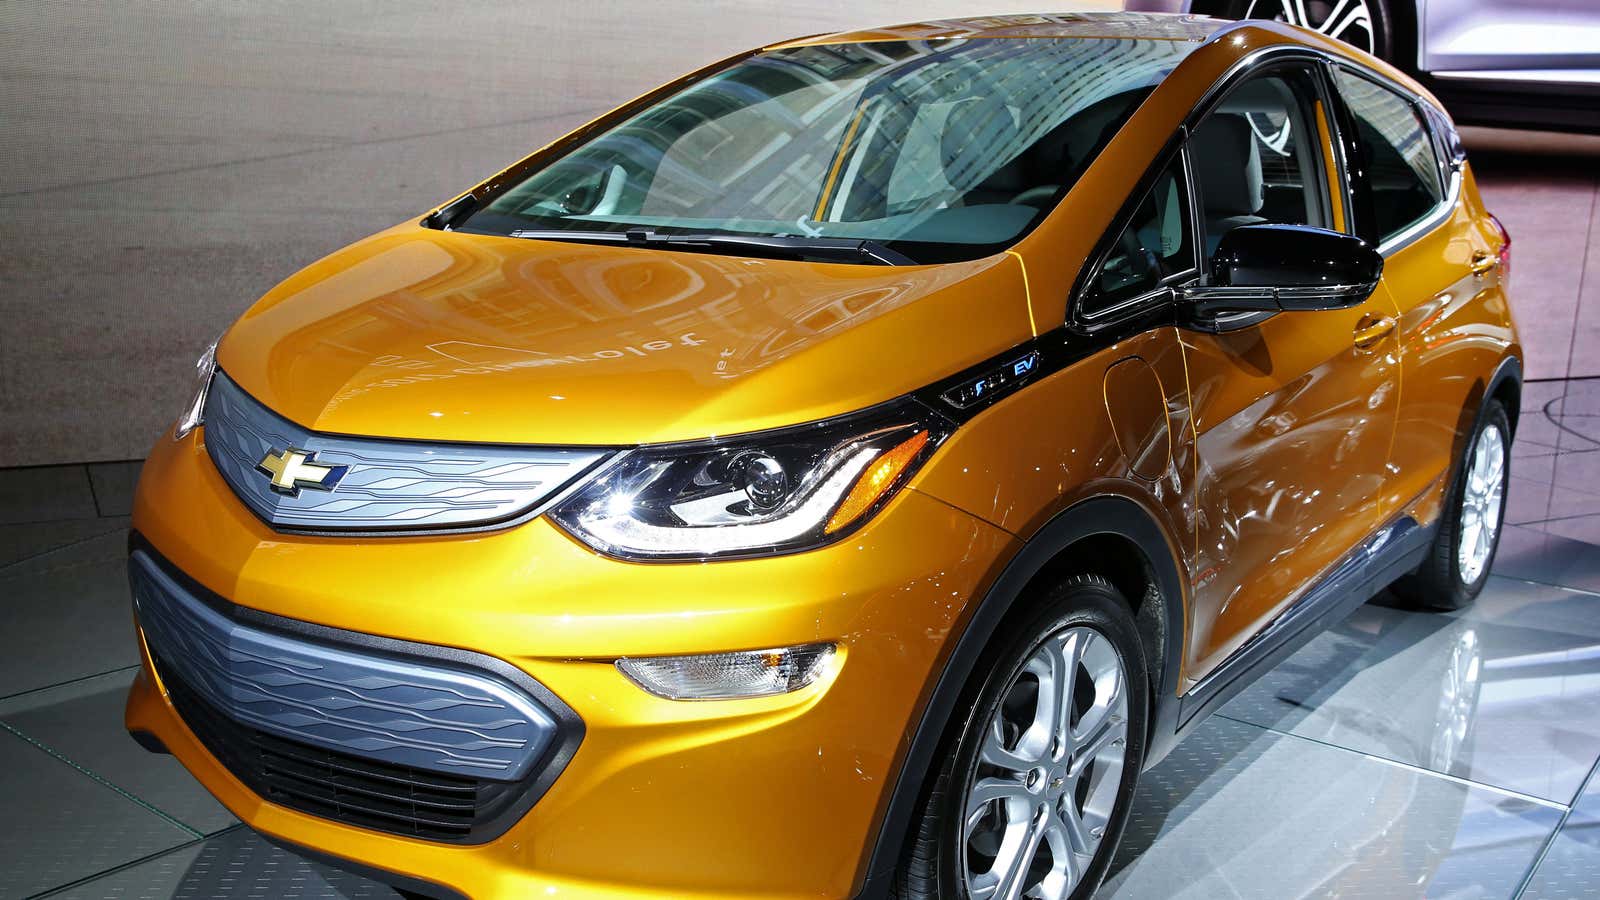 The Chevrolet Bolt EV is pictured at the 2016 Los Angeles Auto Show.